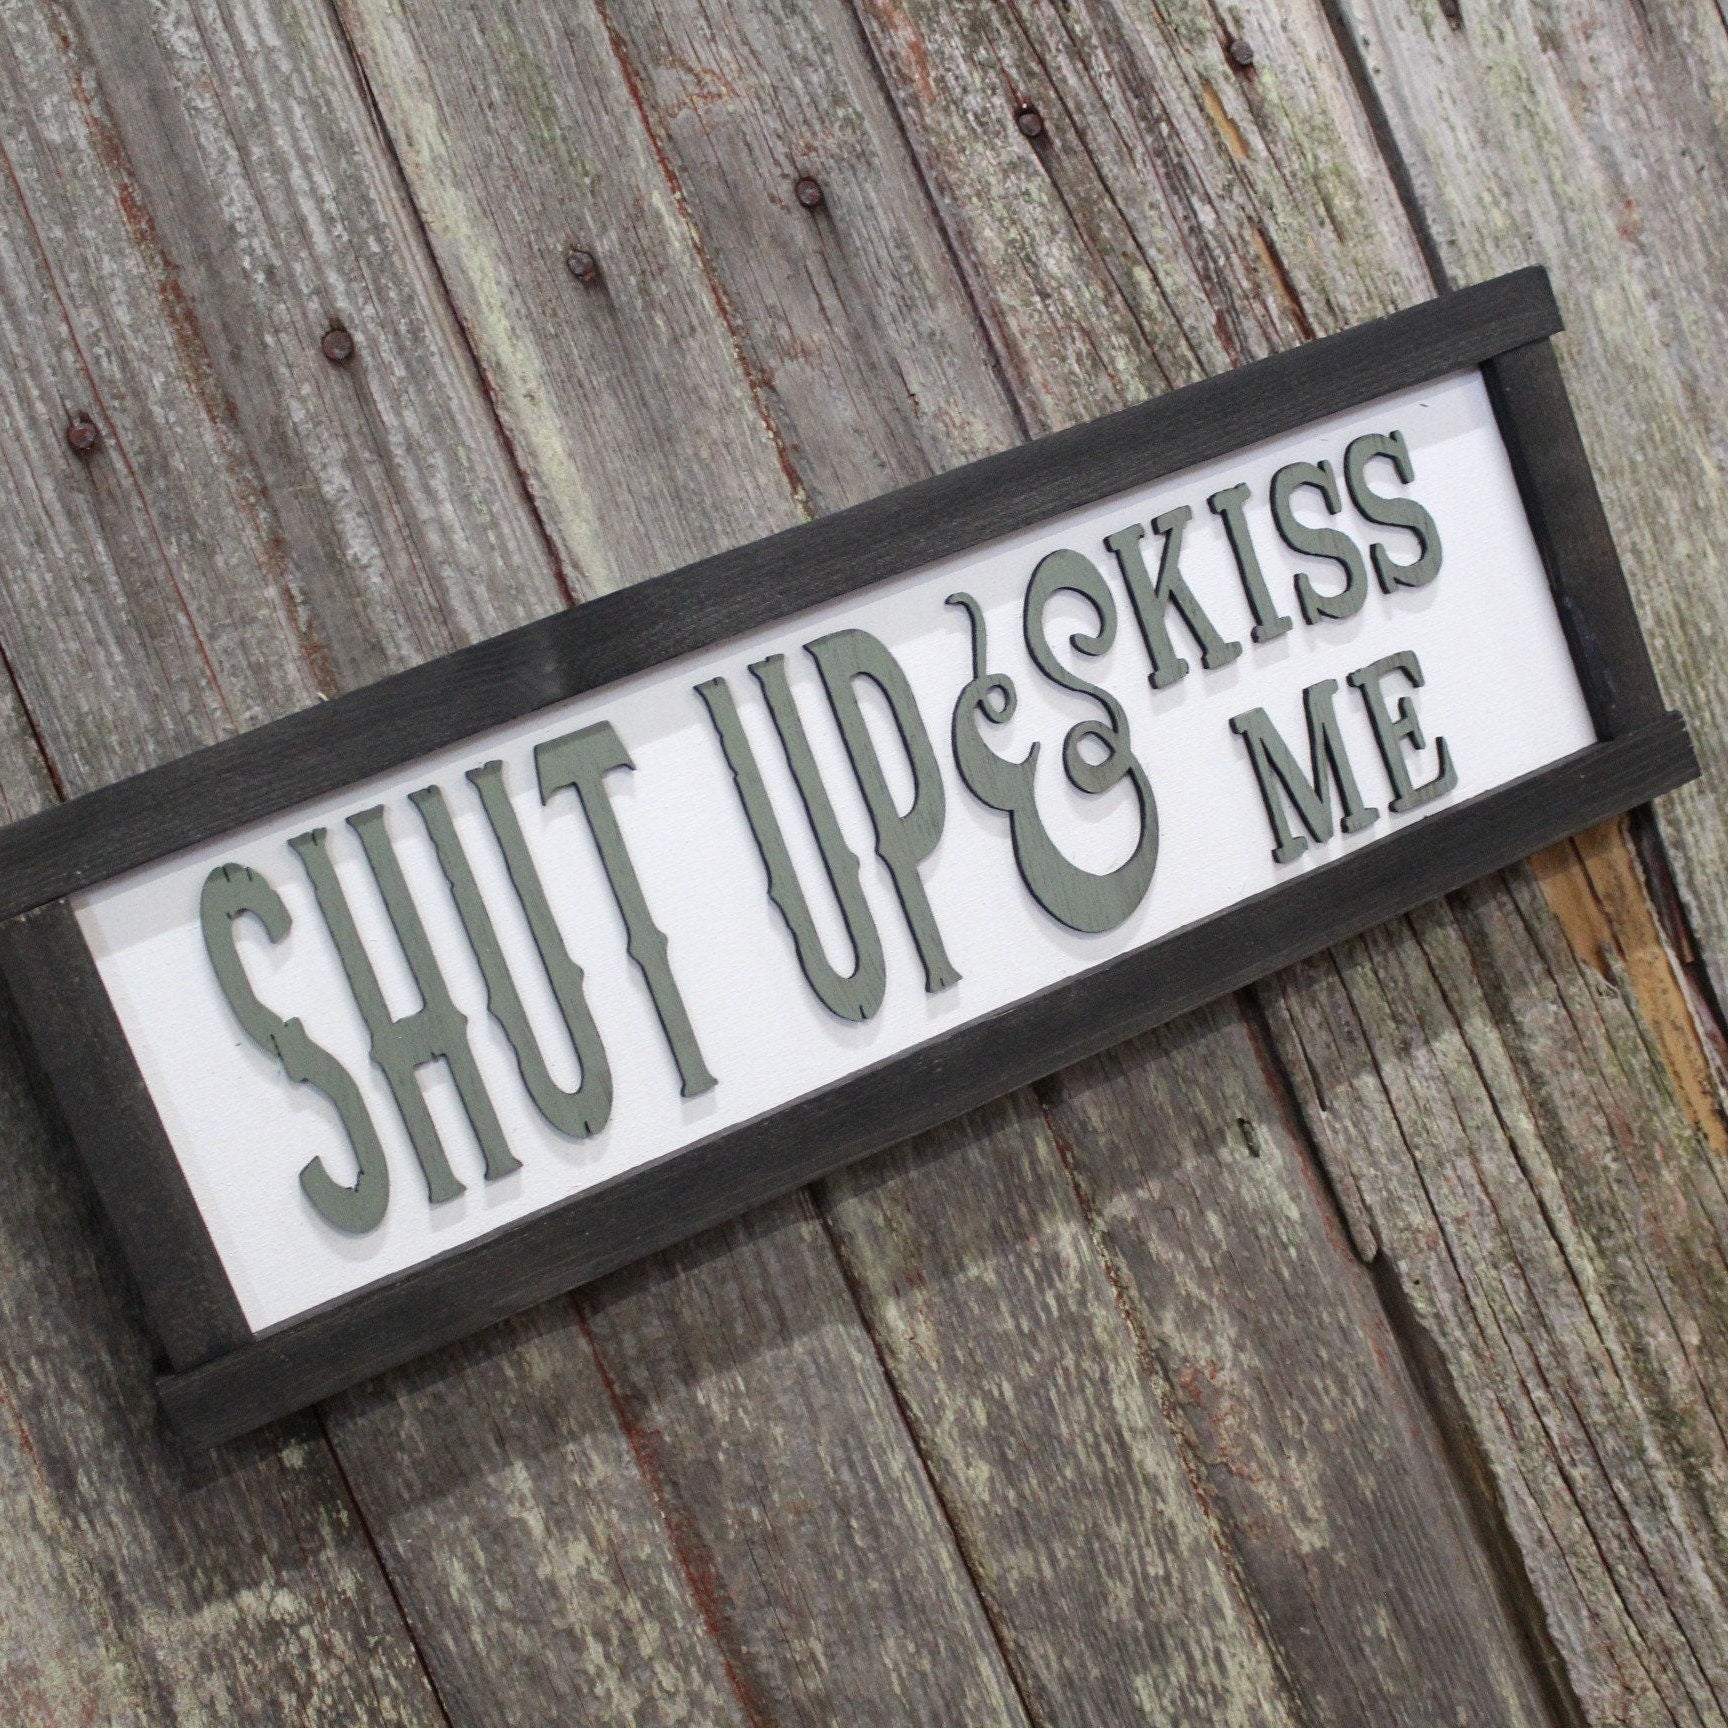 Shut Up And Kiss Me Wood Sign 3D Raised Text Anniversary Gift Master Bedroom Farmhouse Handmade Rustic Primitive